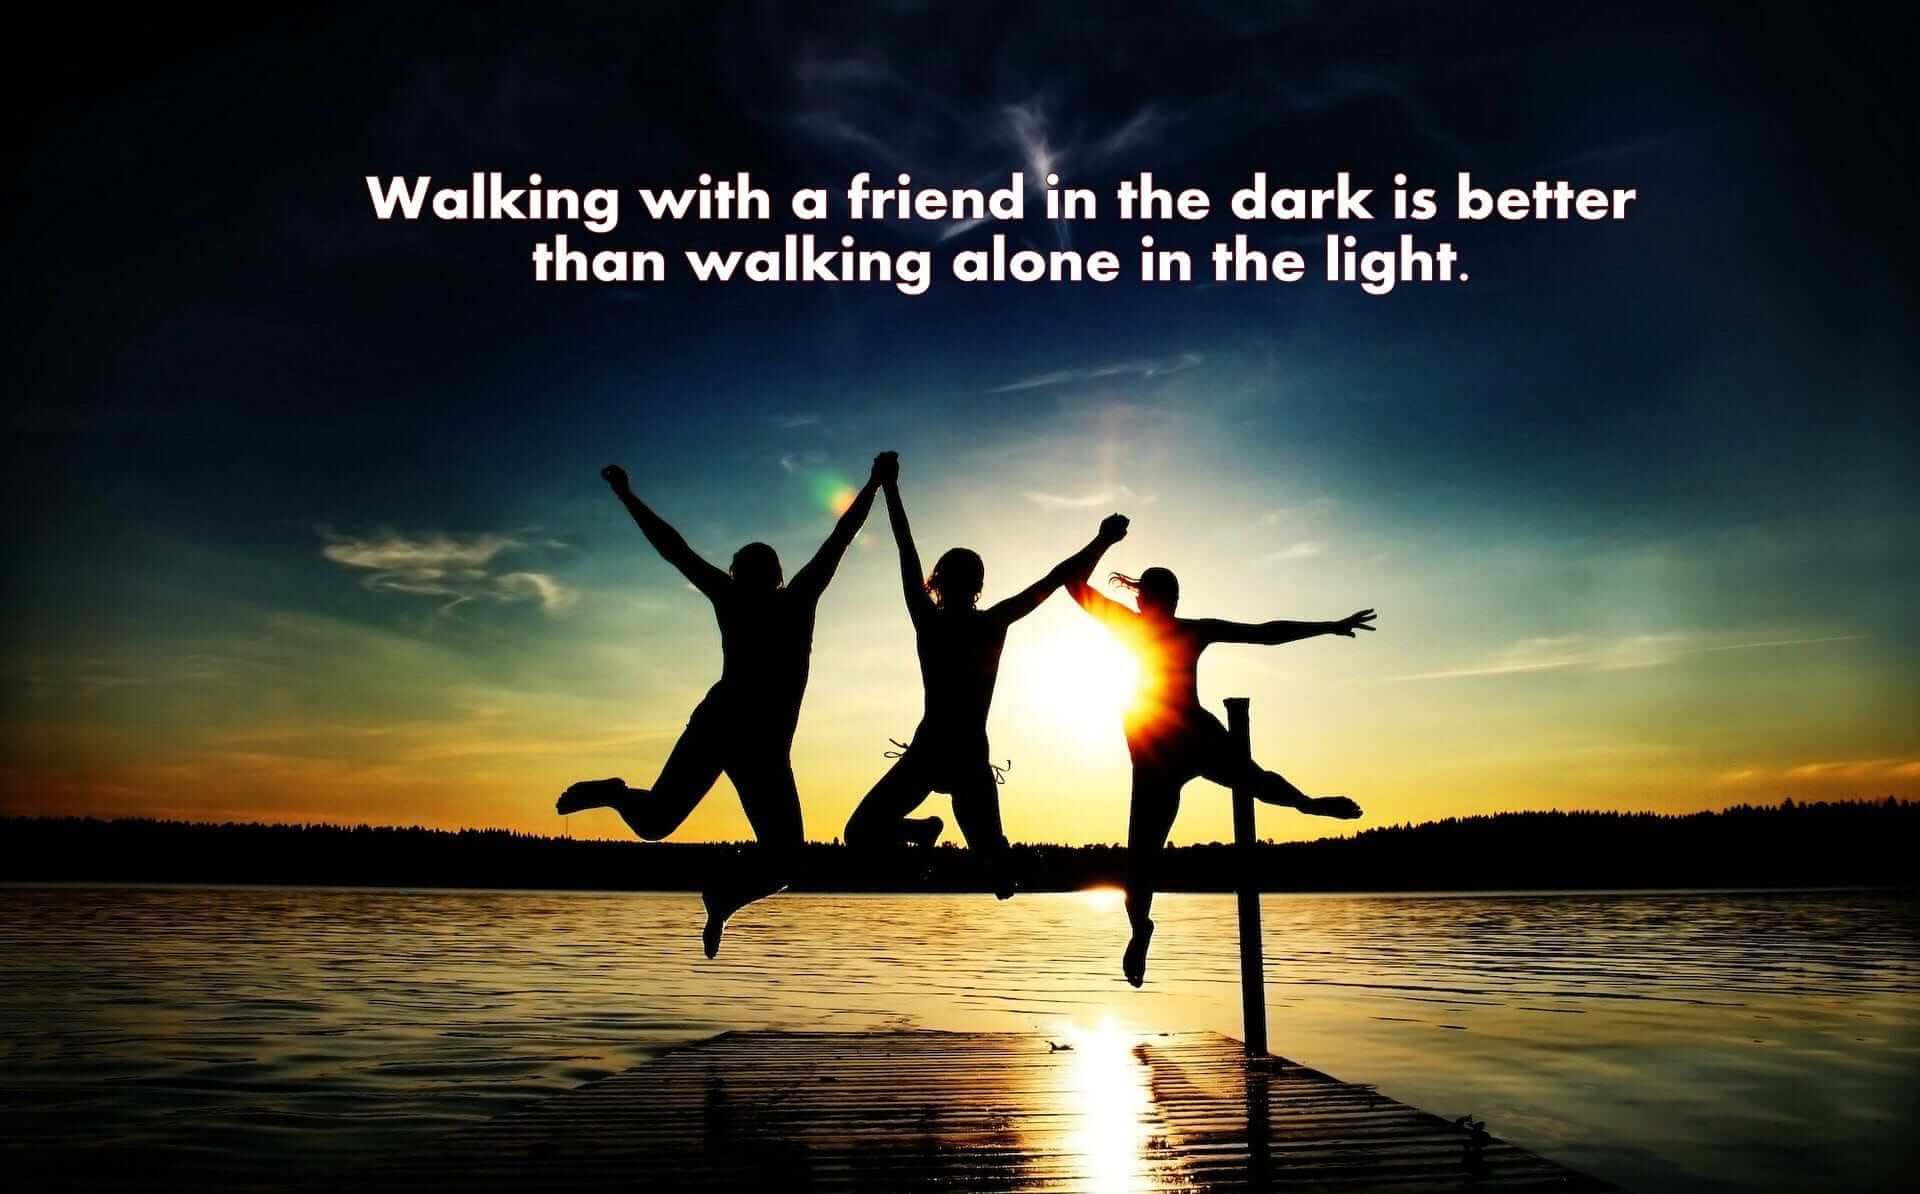 Happy Friendship Day 2022 Image, Picture, Photo, Greetings Cards, HD Wallpaper Free Download To Share on Facebook, Whatsapp